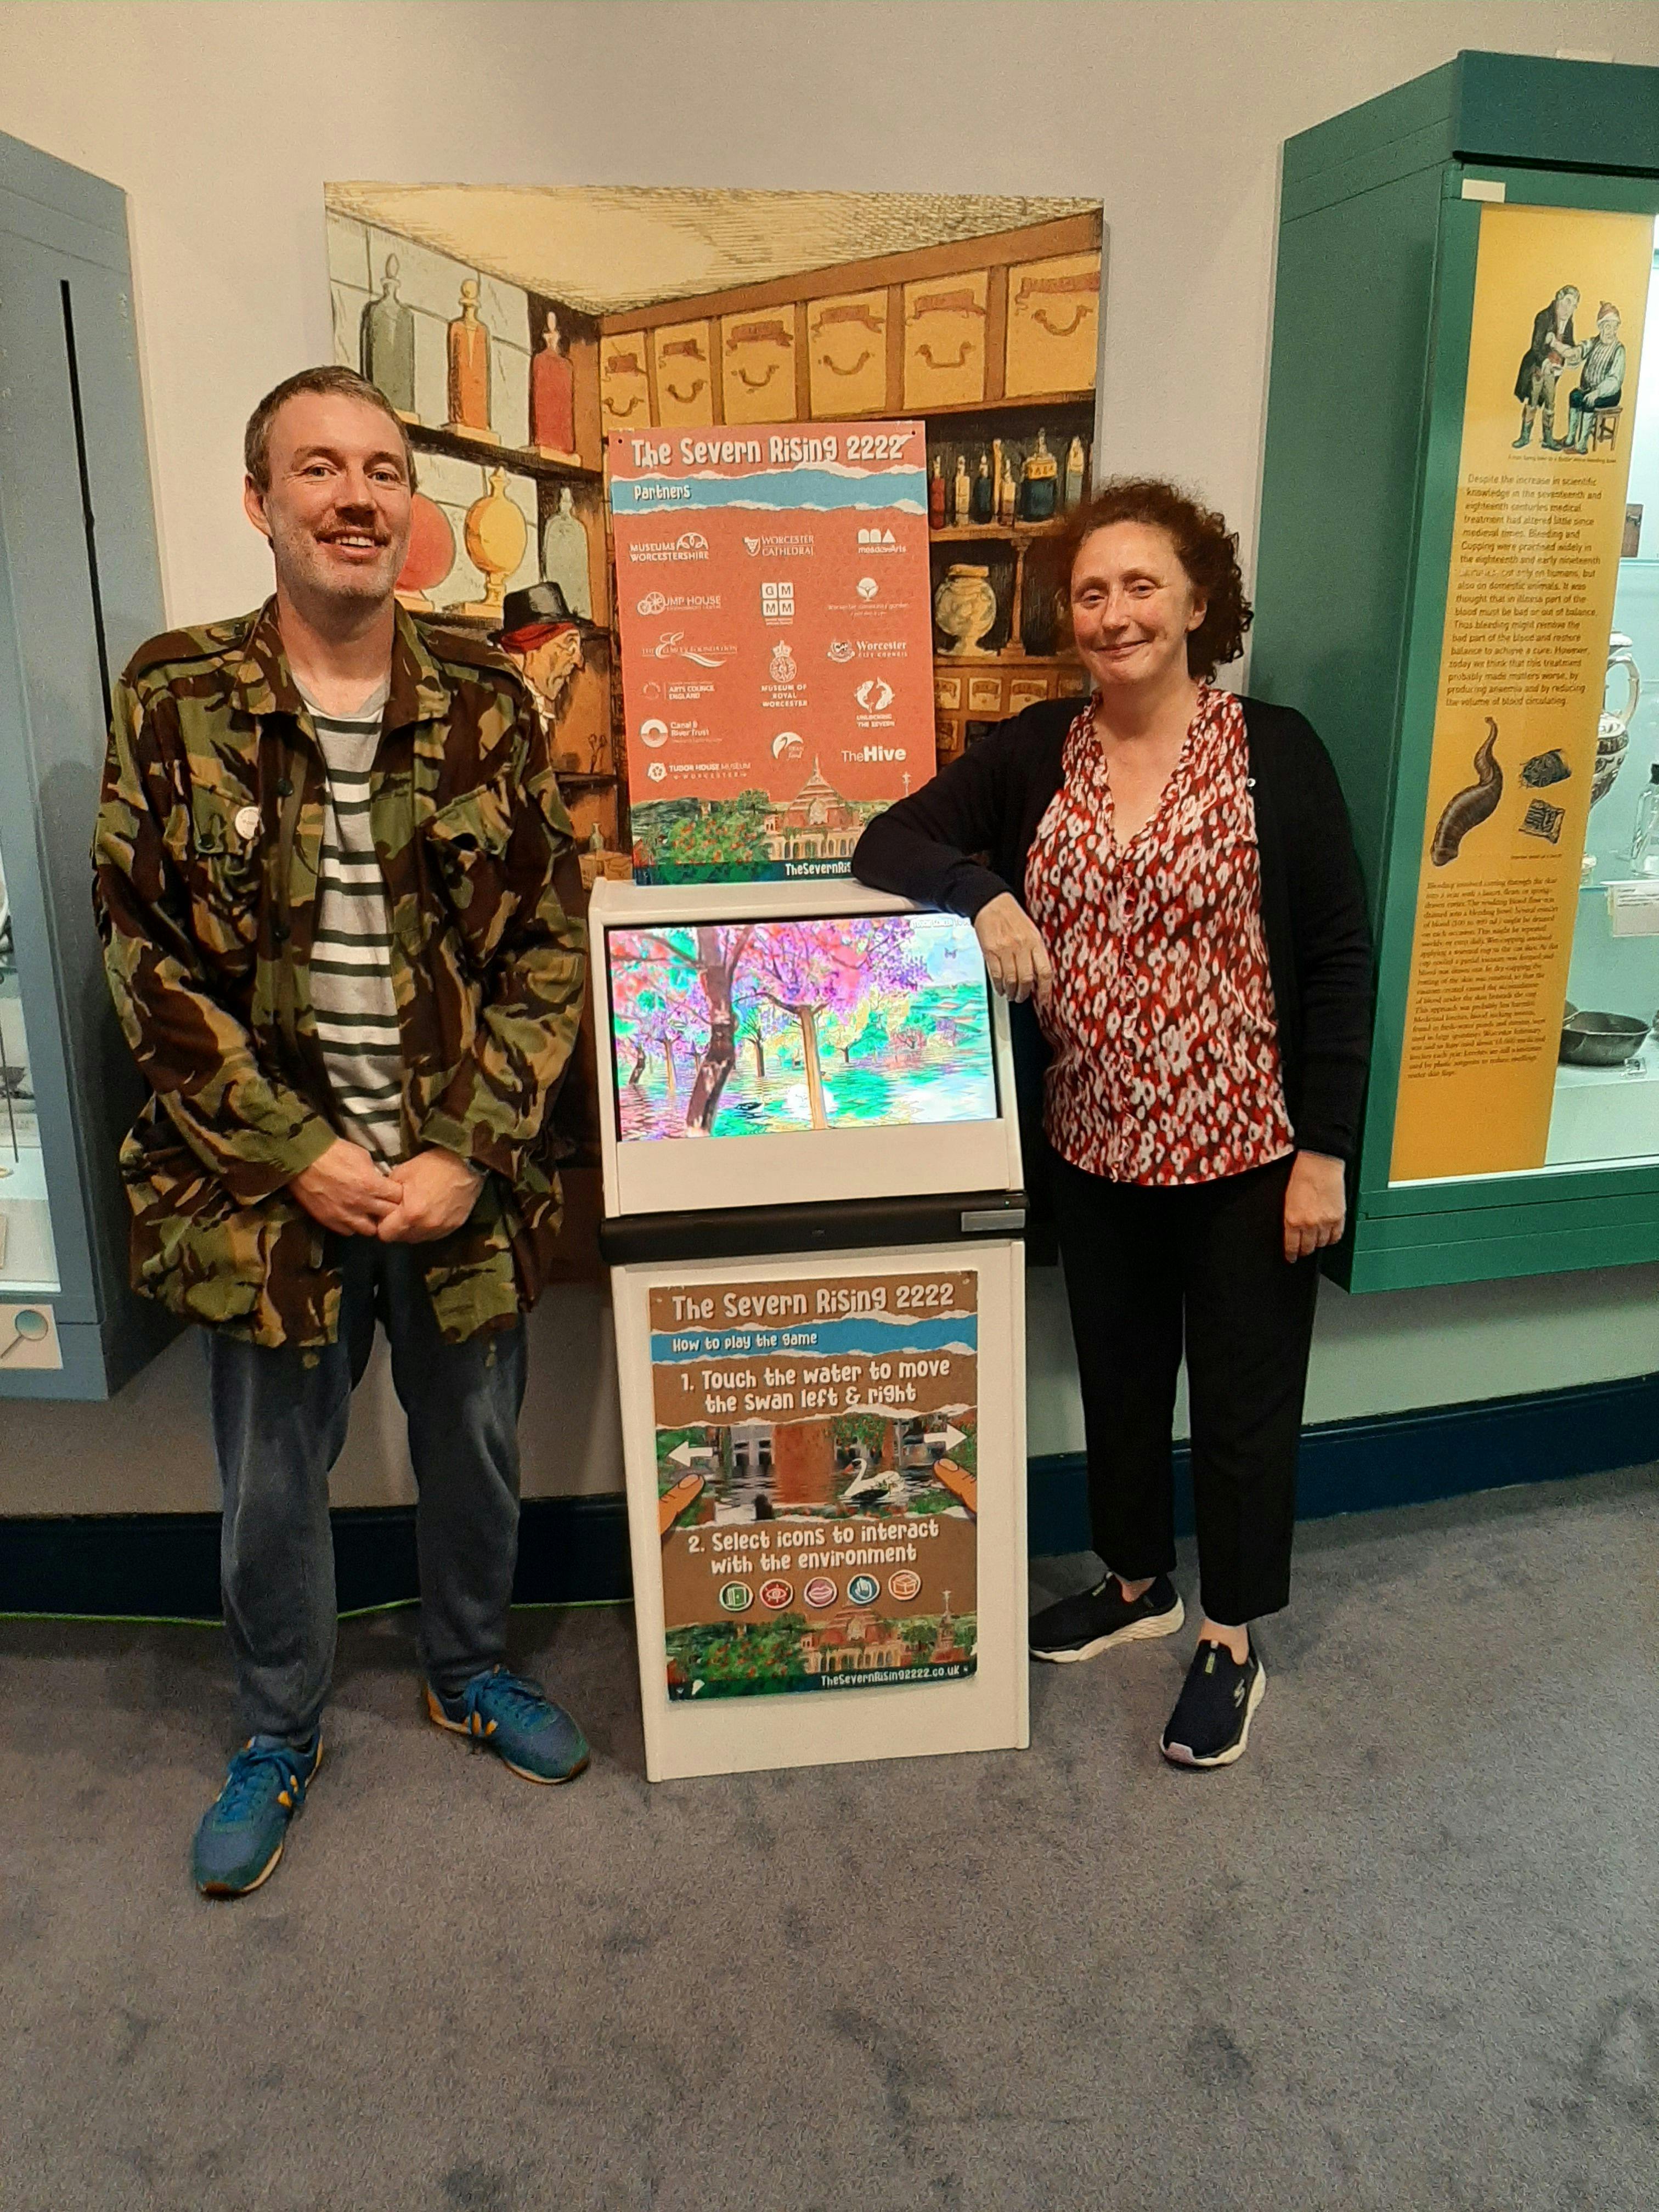 Andy Round and illustrator Sarah Millin stand next to the arcade version of The Severn Rising 2222 at the George Marshall Medical Museum.